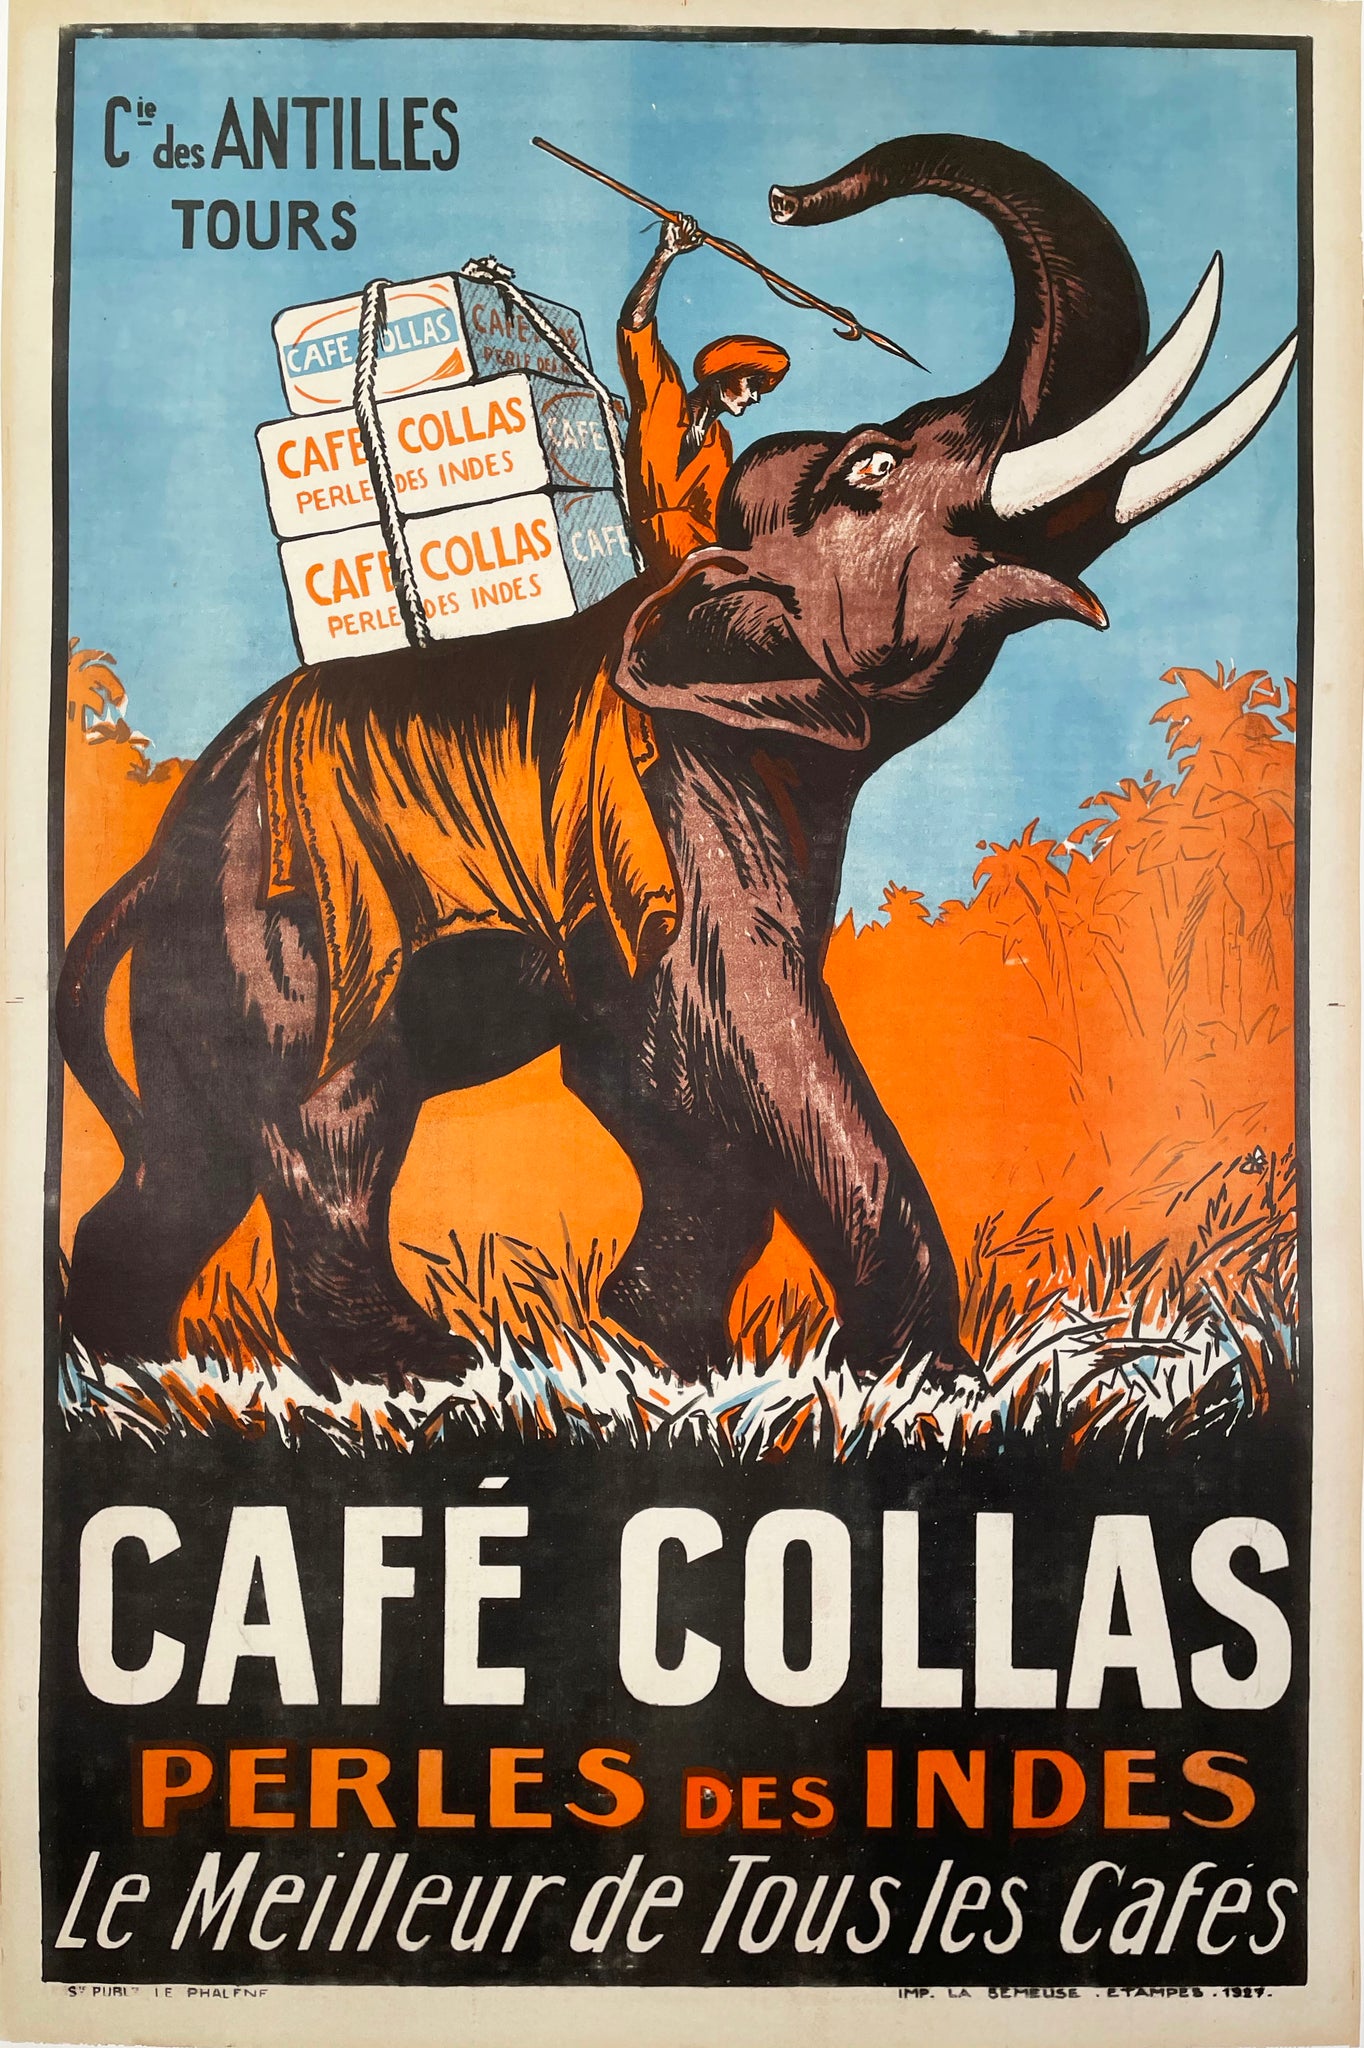 Cafe Collas - Vintage French Advertising Poster, 1927